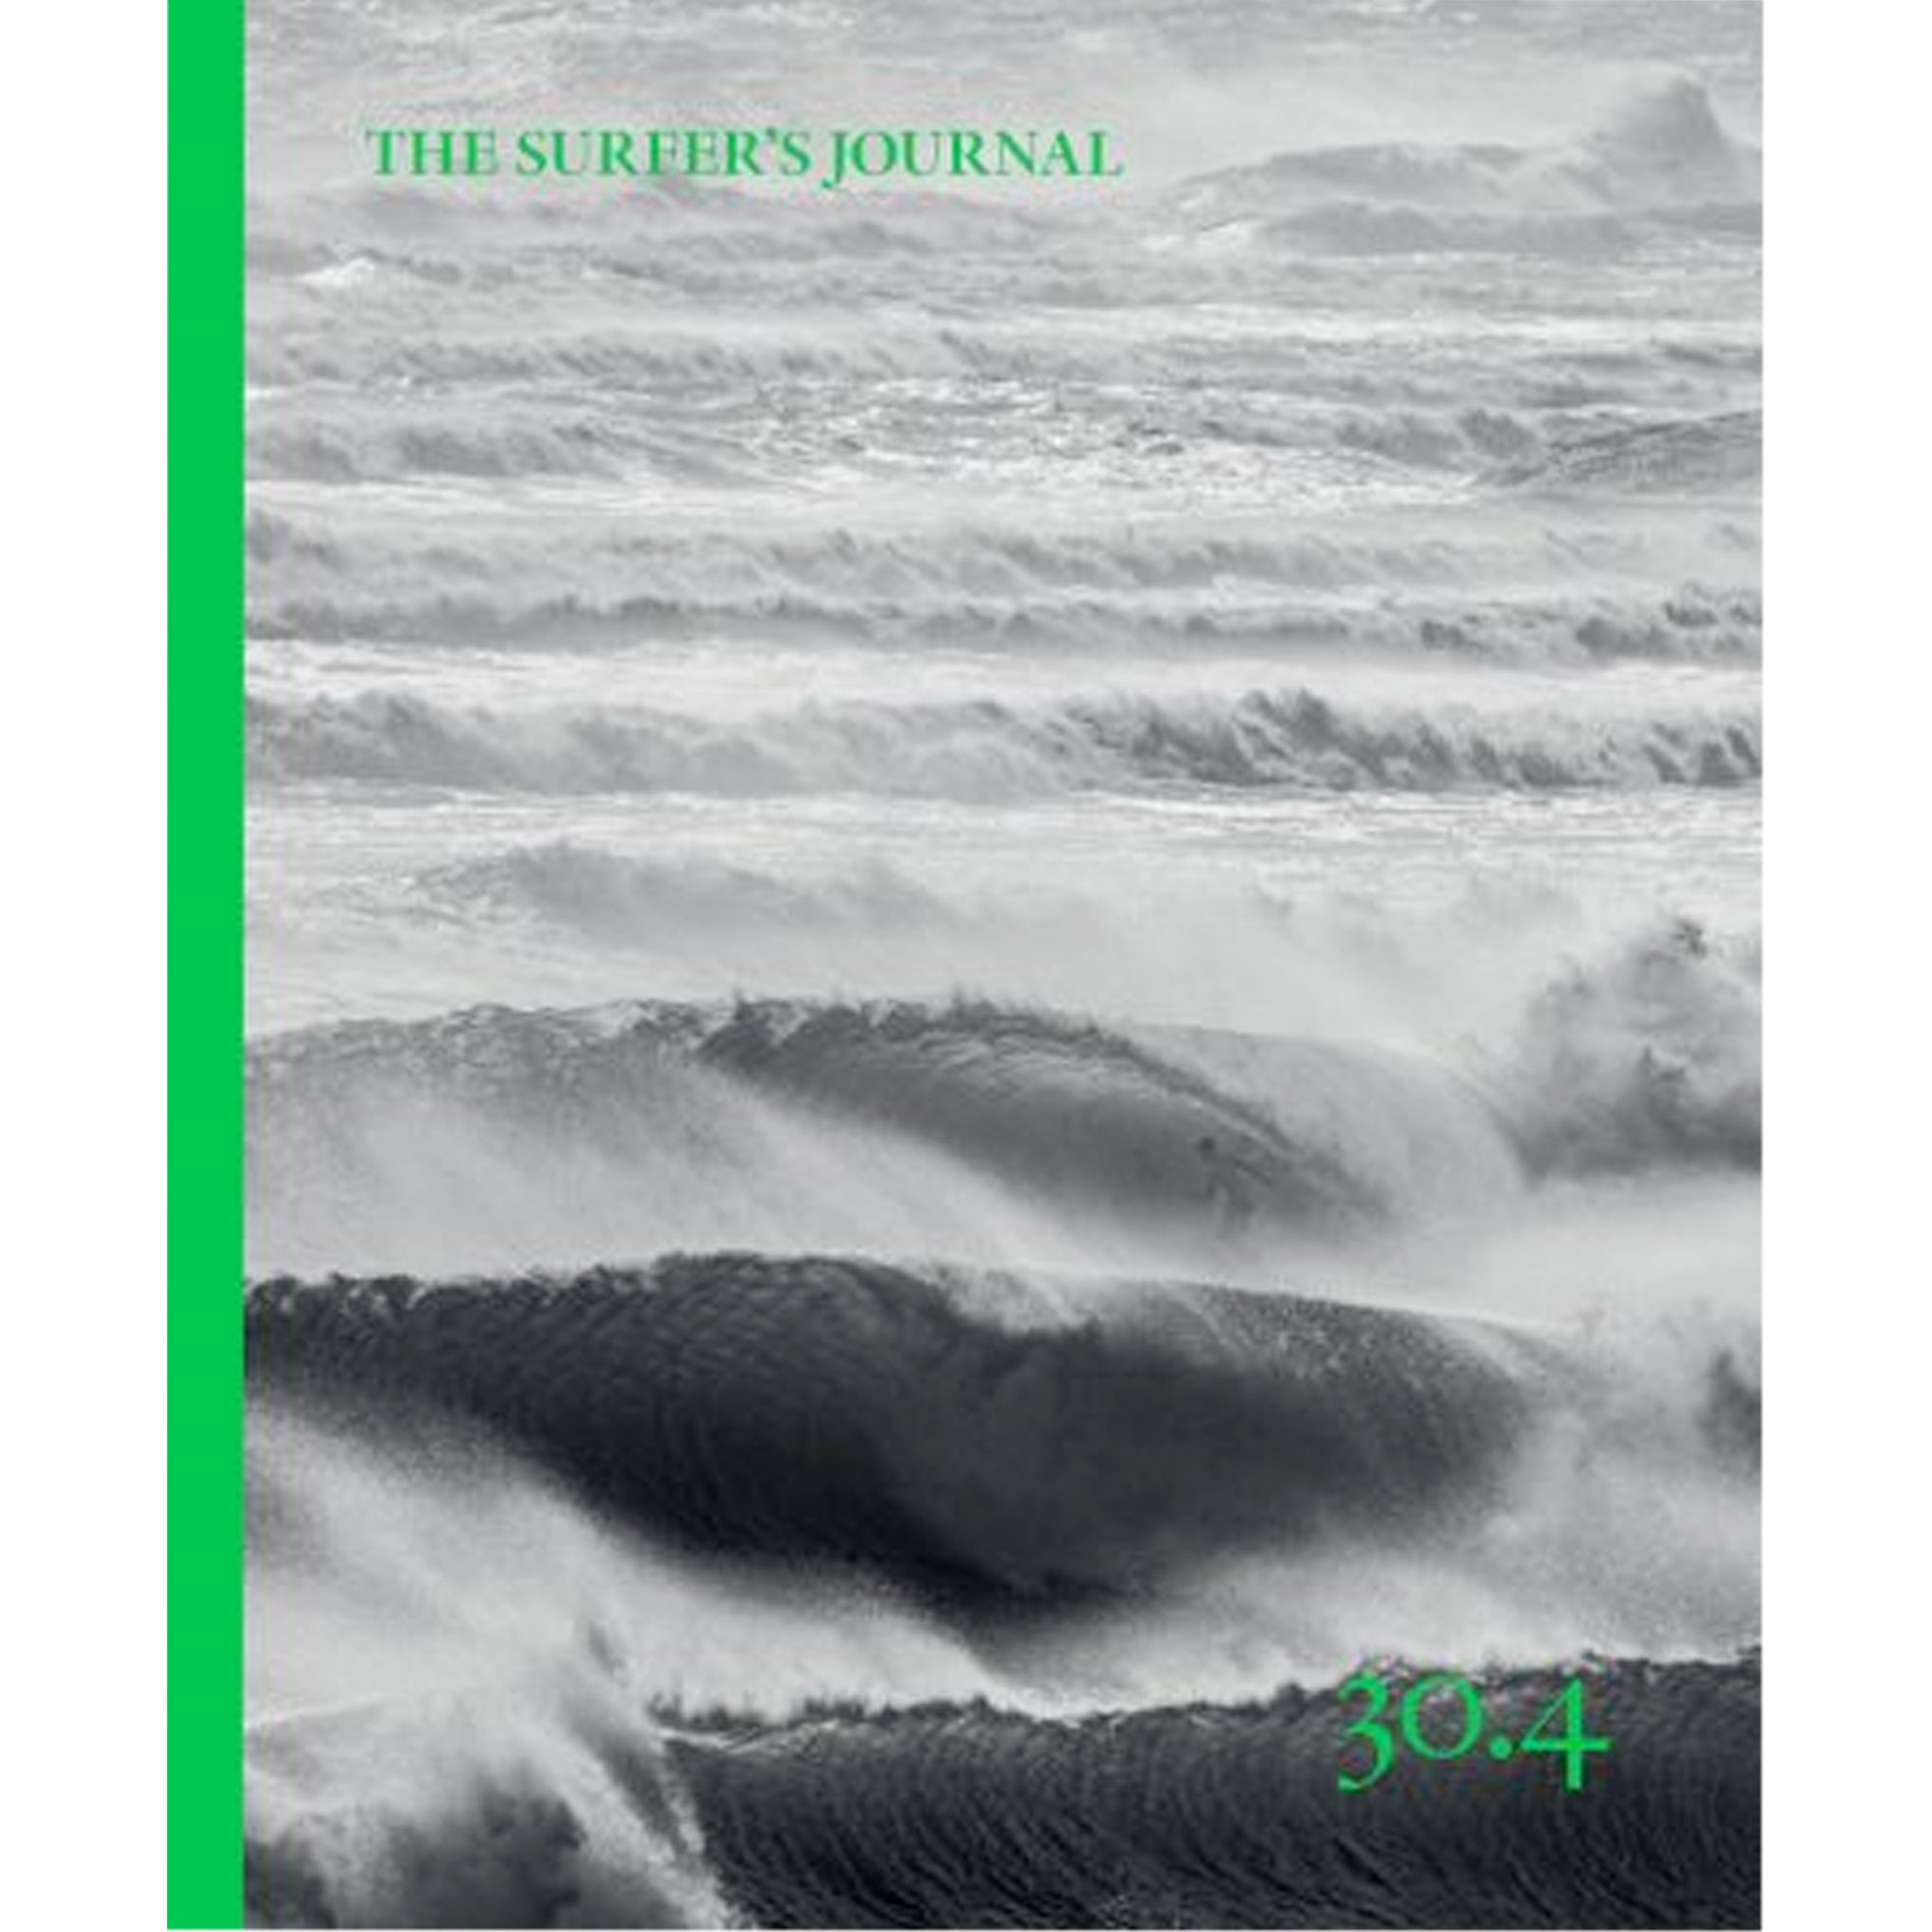 The Surfer Journal #30.4